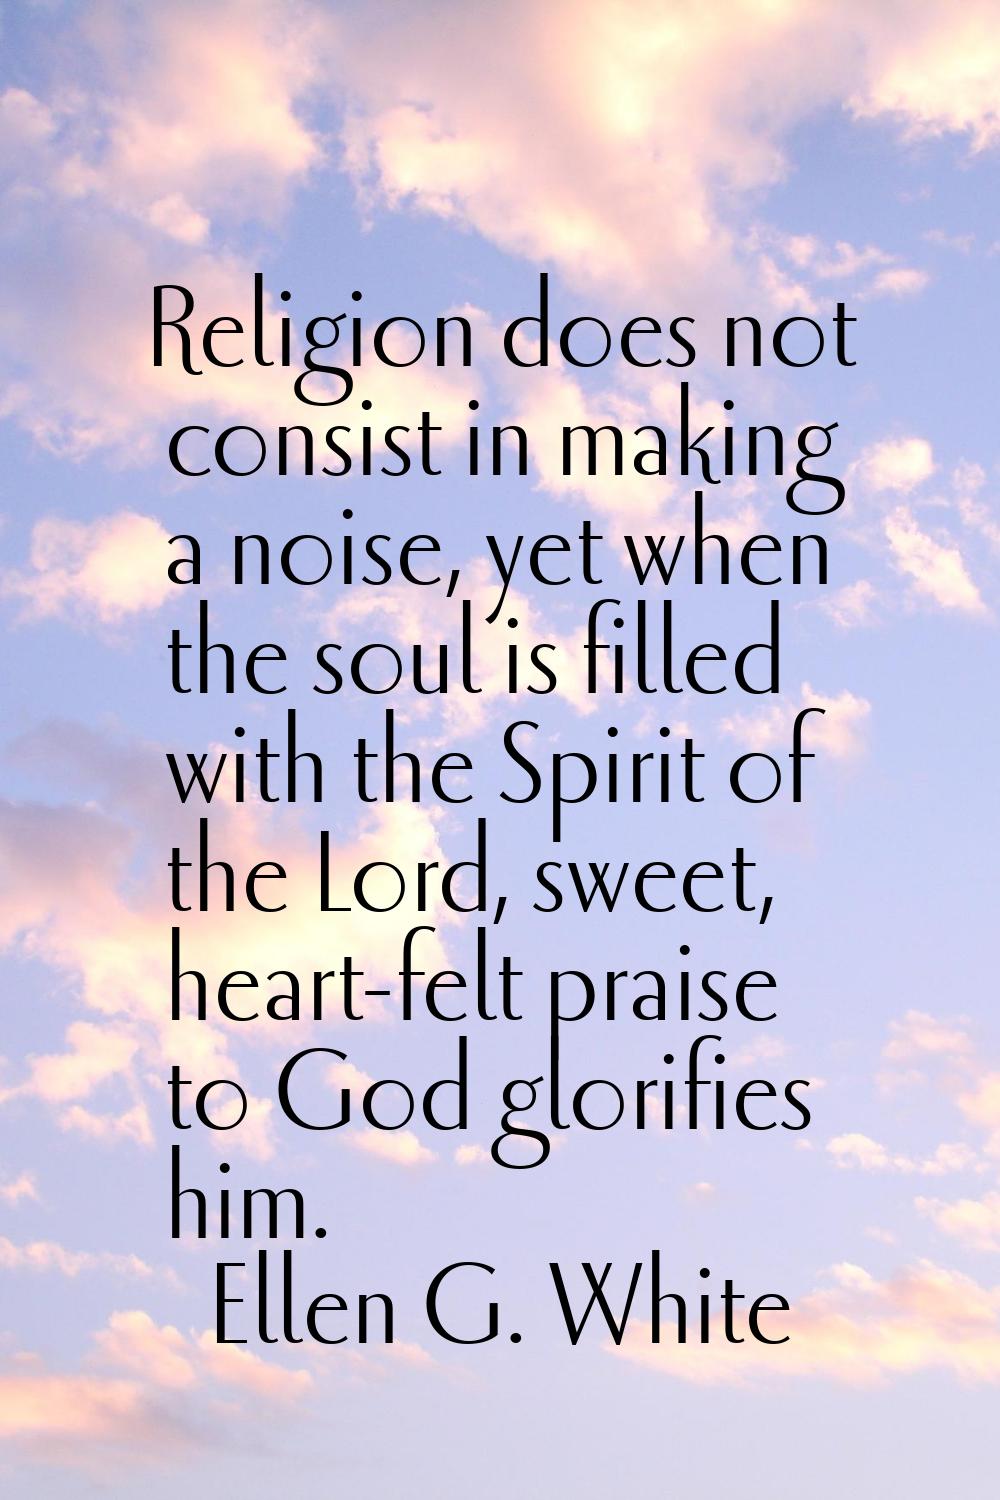 Religion does not consist in making a noise, yet when the soul is filled with the Spirit of the Lor